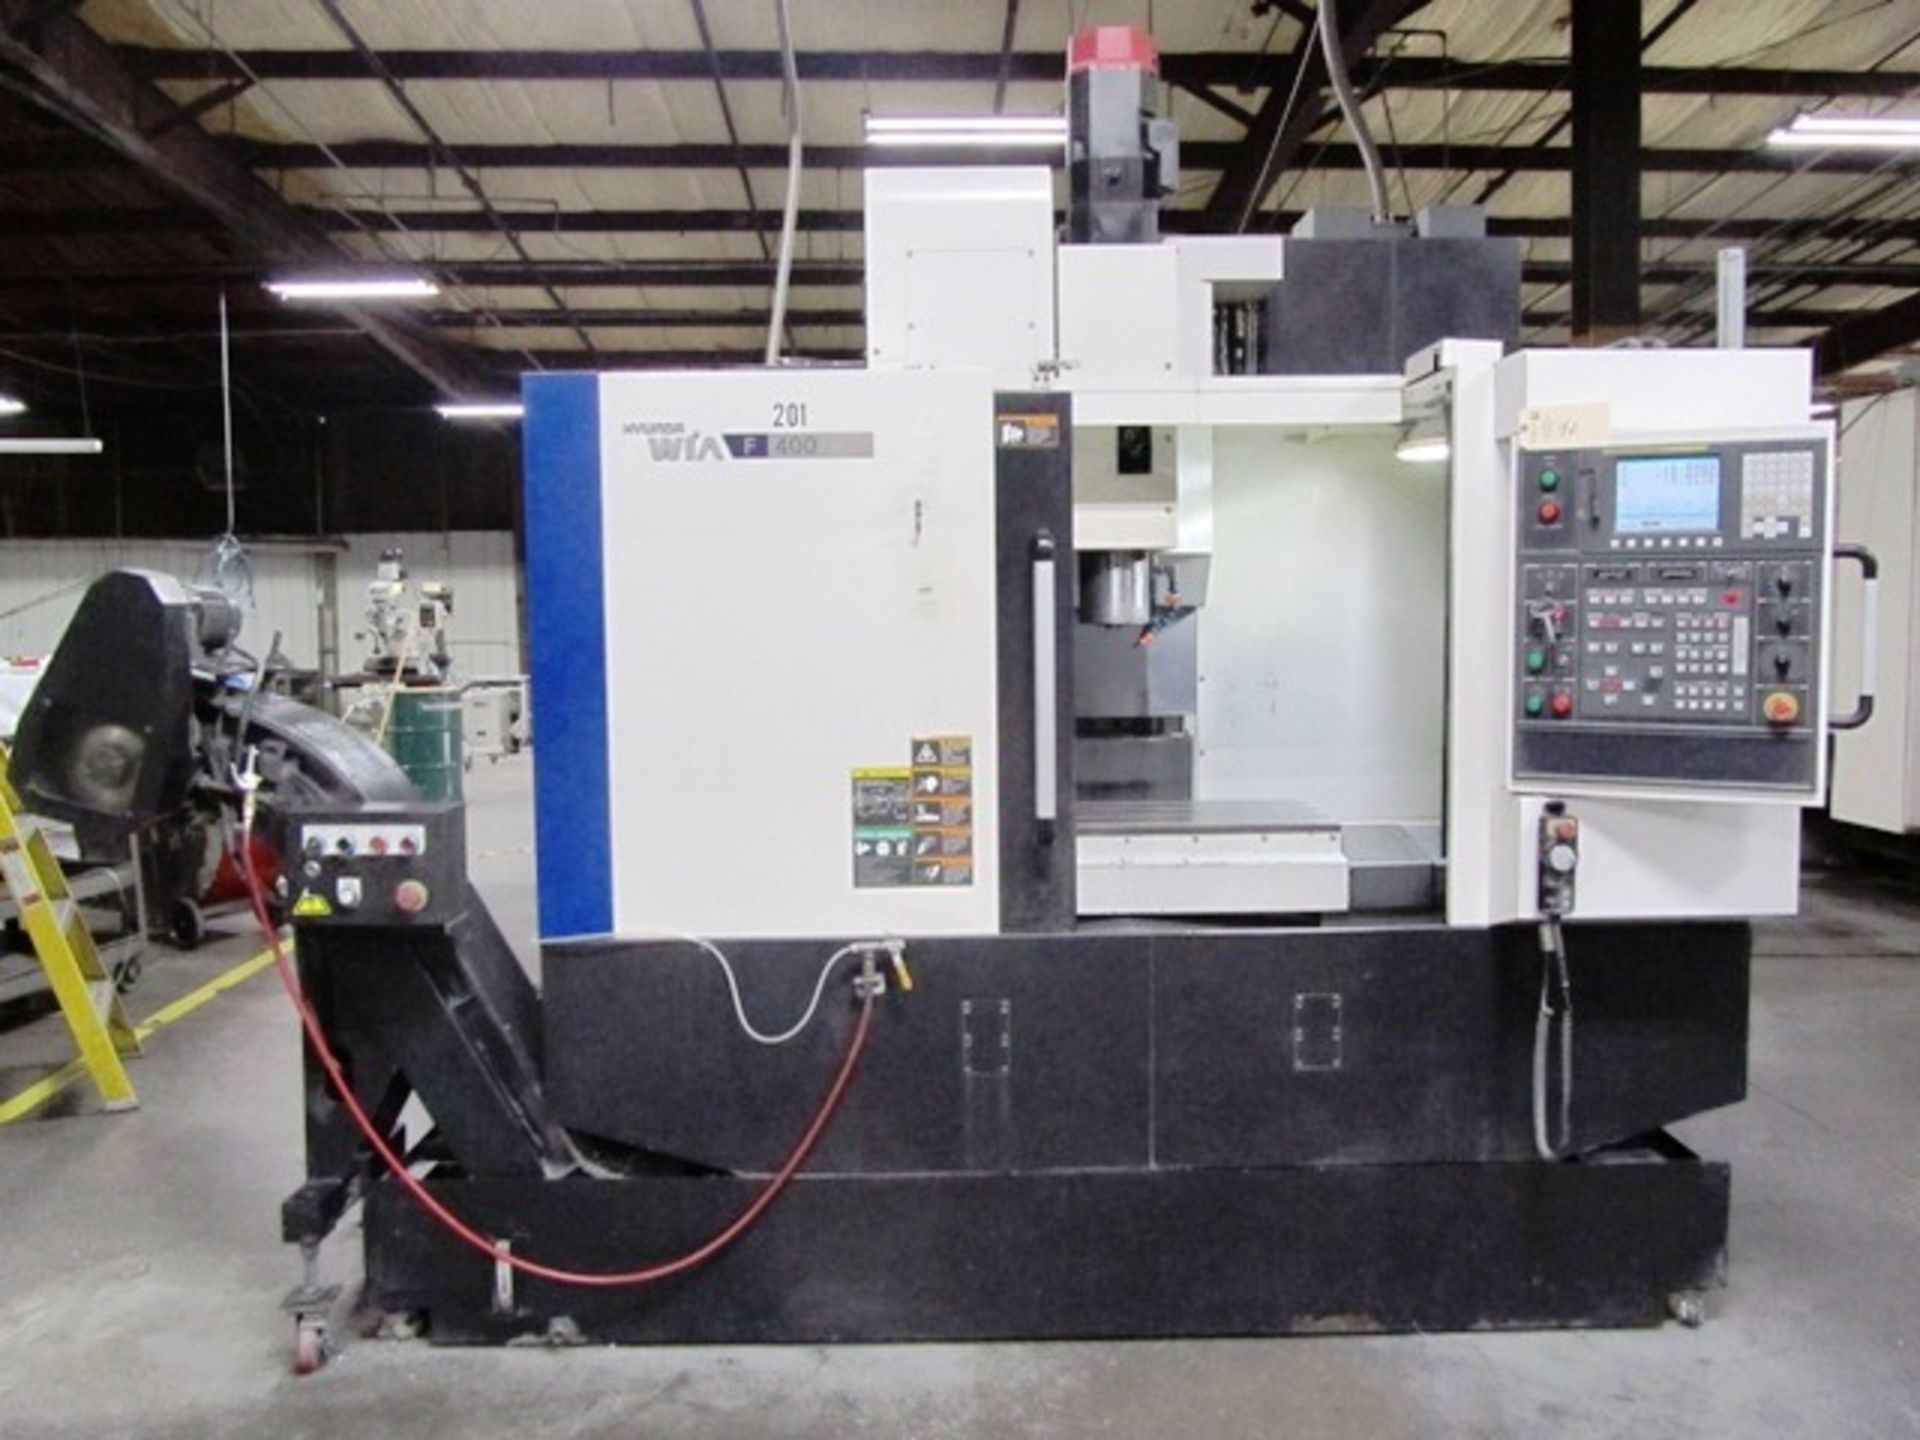 Hyundai WIA F400 CNC Vertical Machining Center with 39'' x 18'' Worktable, #40 Taper Spindles Speeds